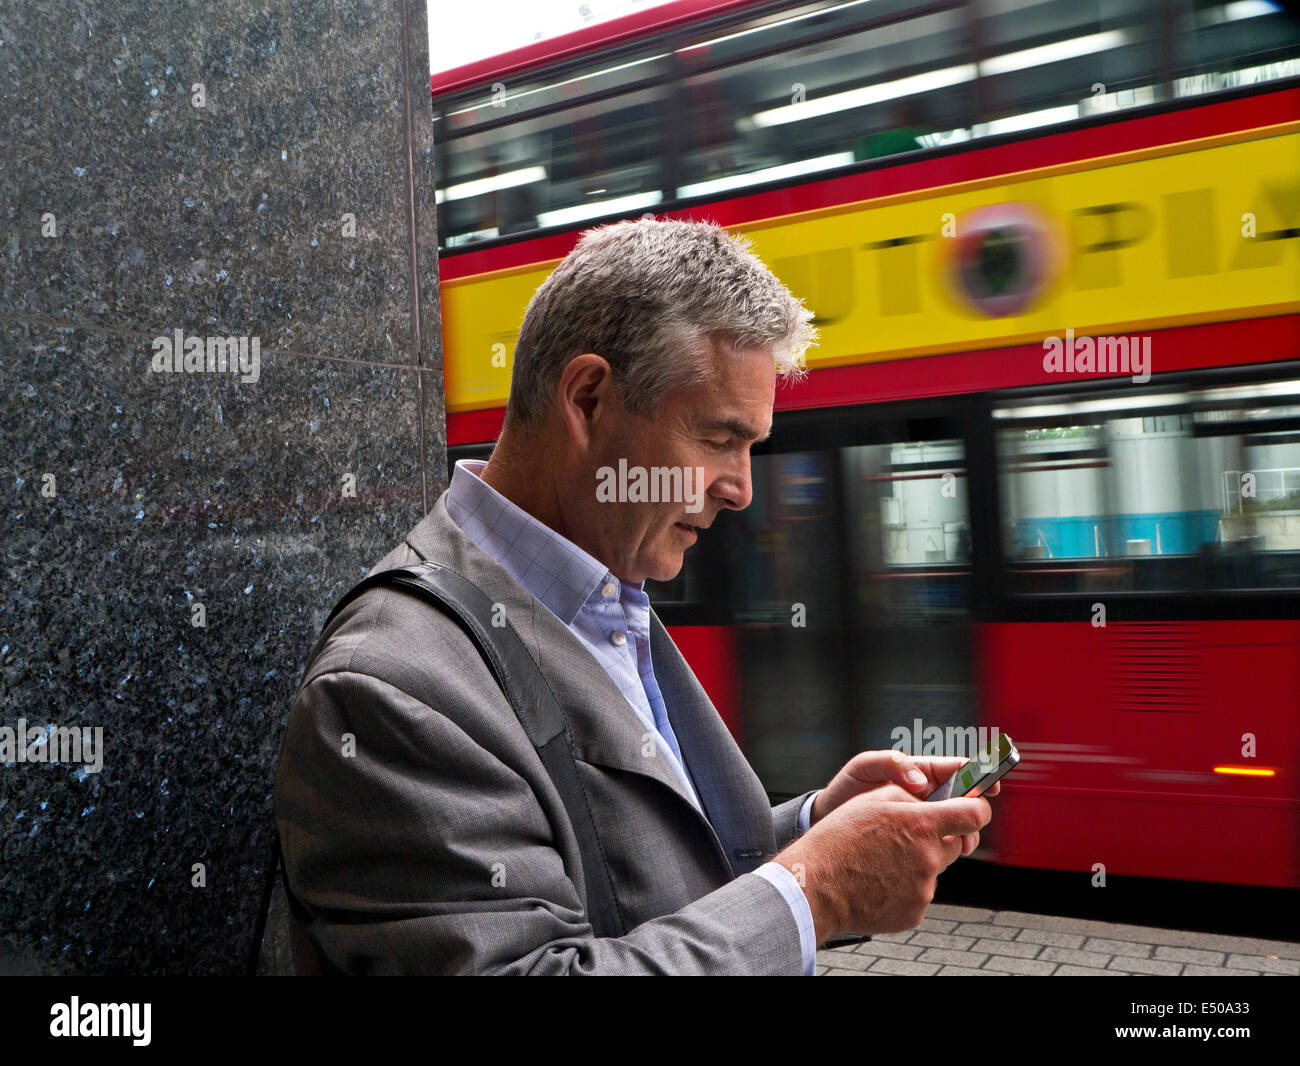 Mature businessman using an iPhone smartphone in London Southbank with blurred traditional London red bus passing in background Stock Photo